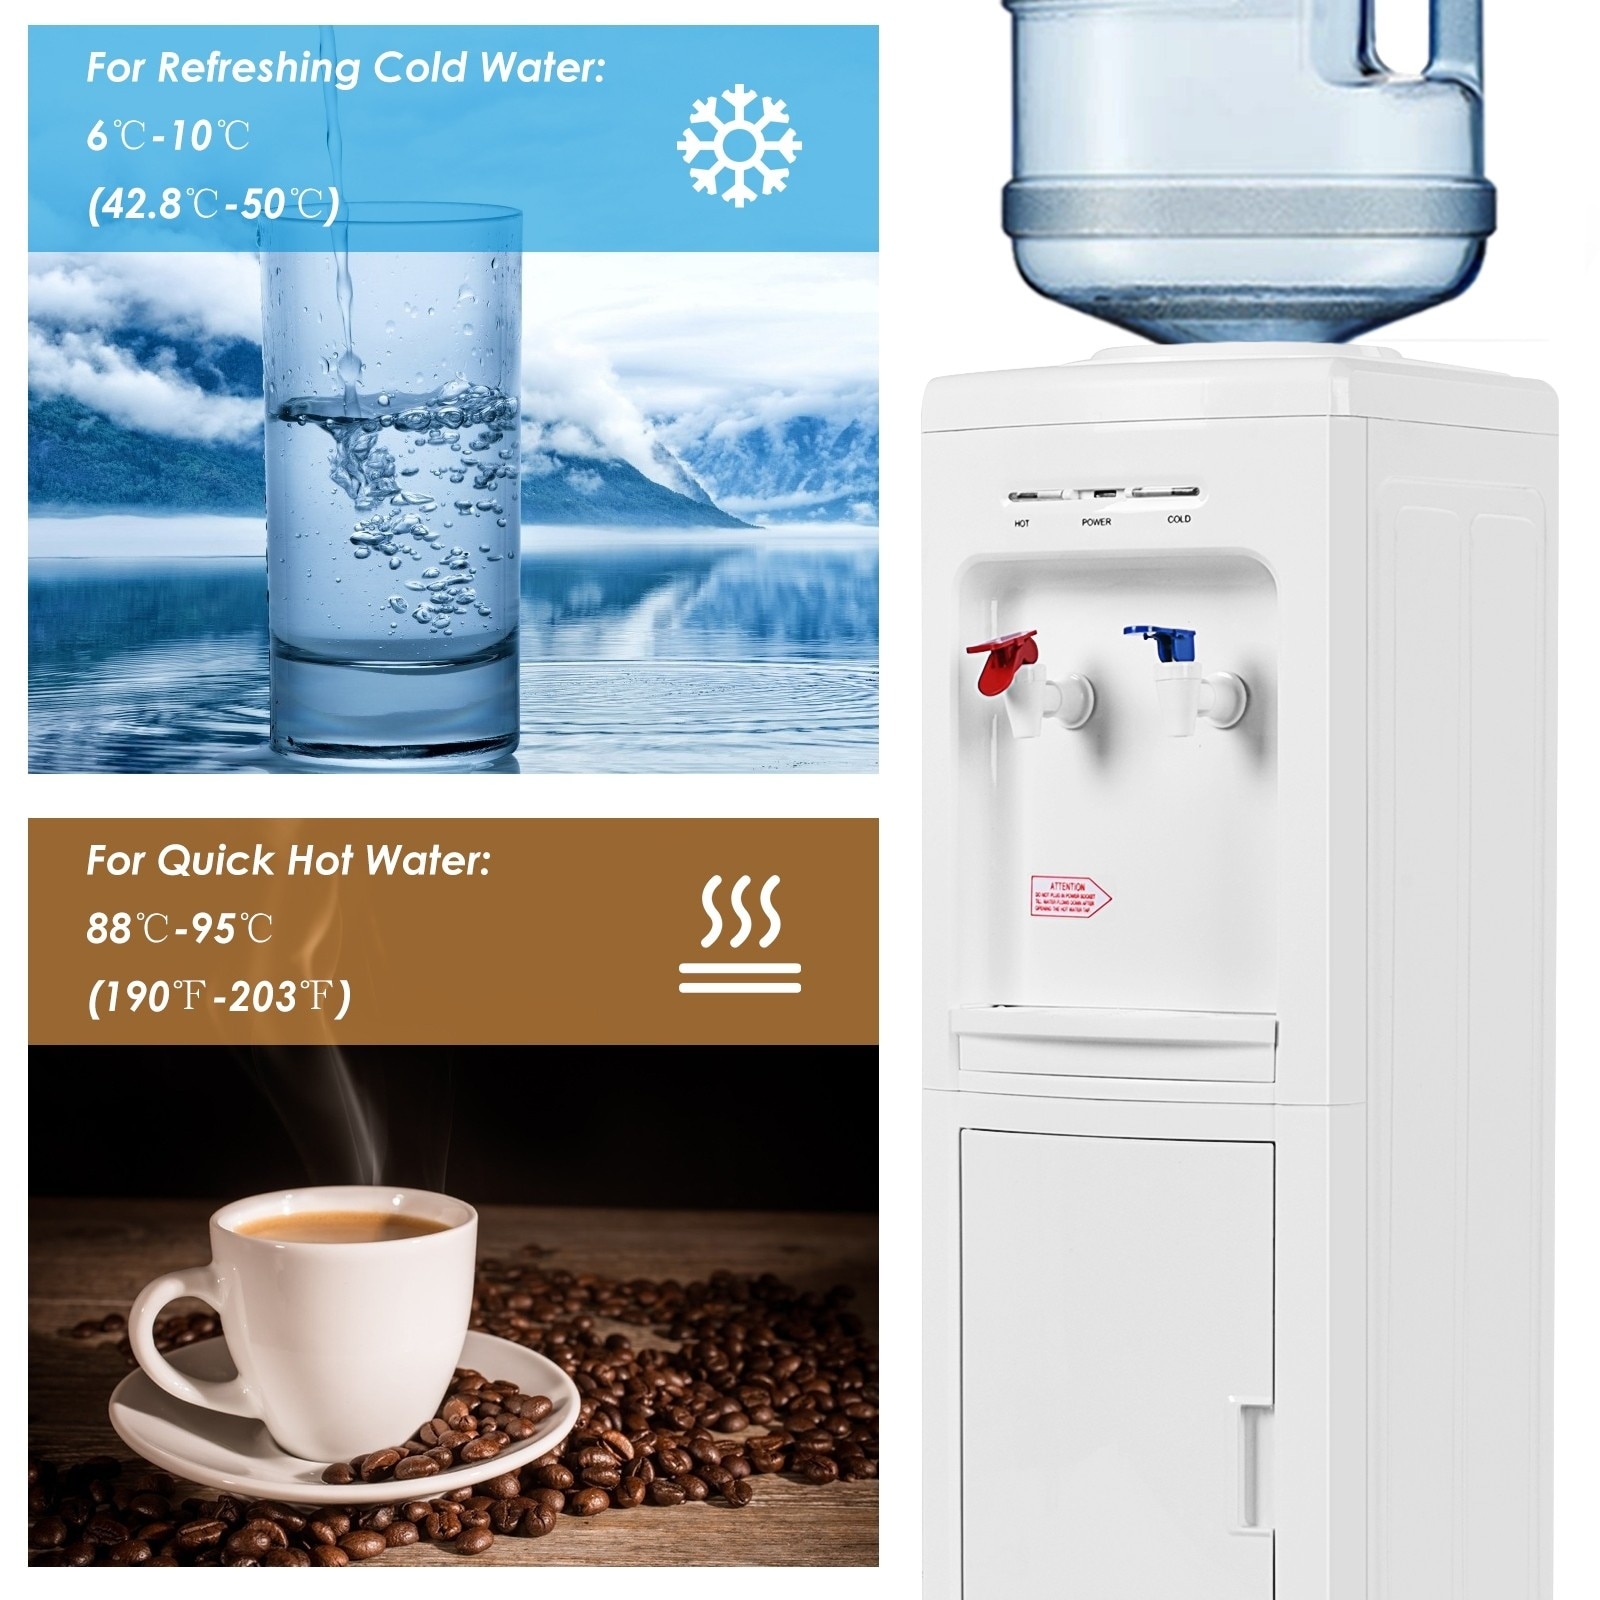 https://ak1.ostkcdn.com/images/products/is/images/direct/b0d5222b156b52430e5d6225d8684633f9e2bbe5/5-Gallons-Cold-and-Hot-Water-Dispenser.jpg